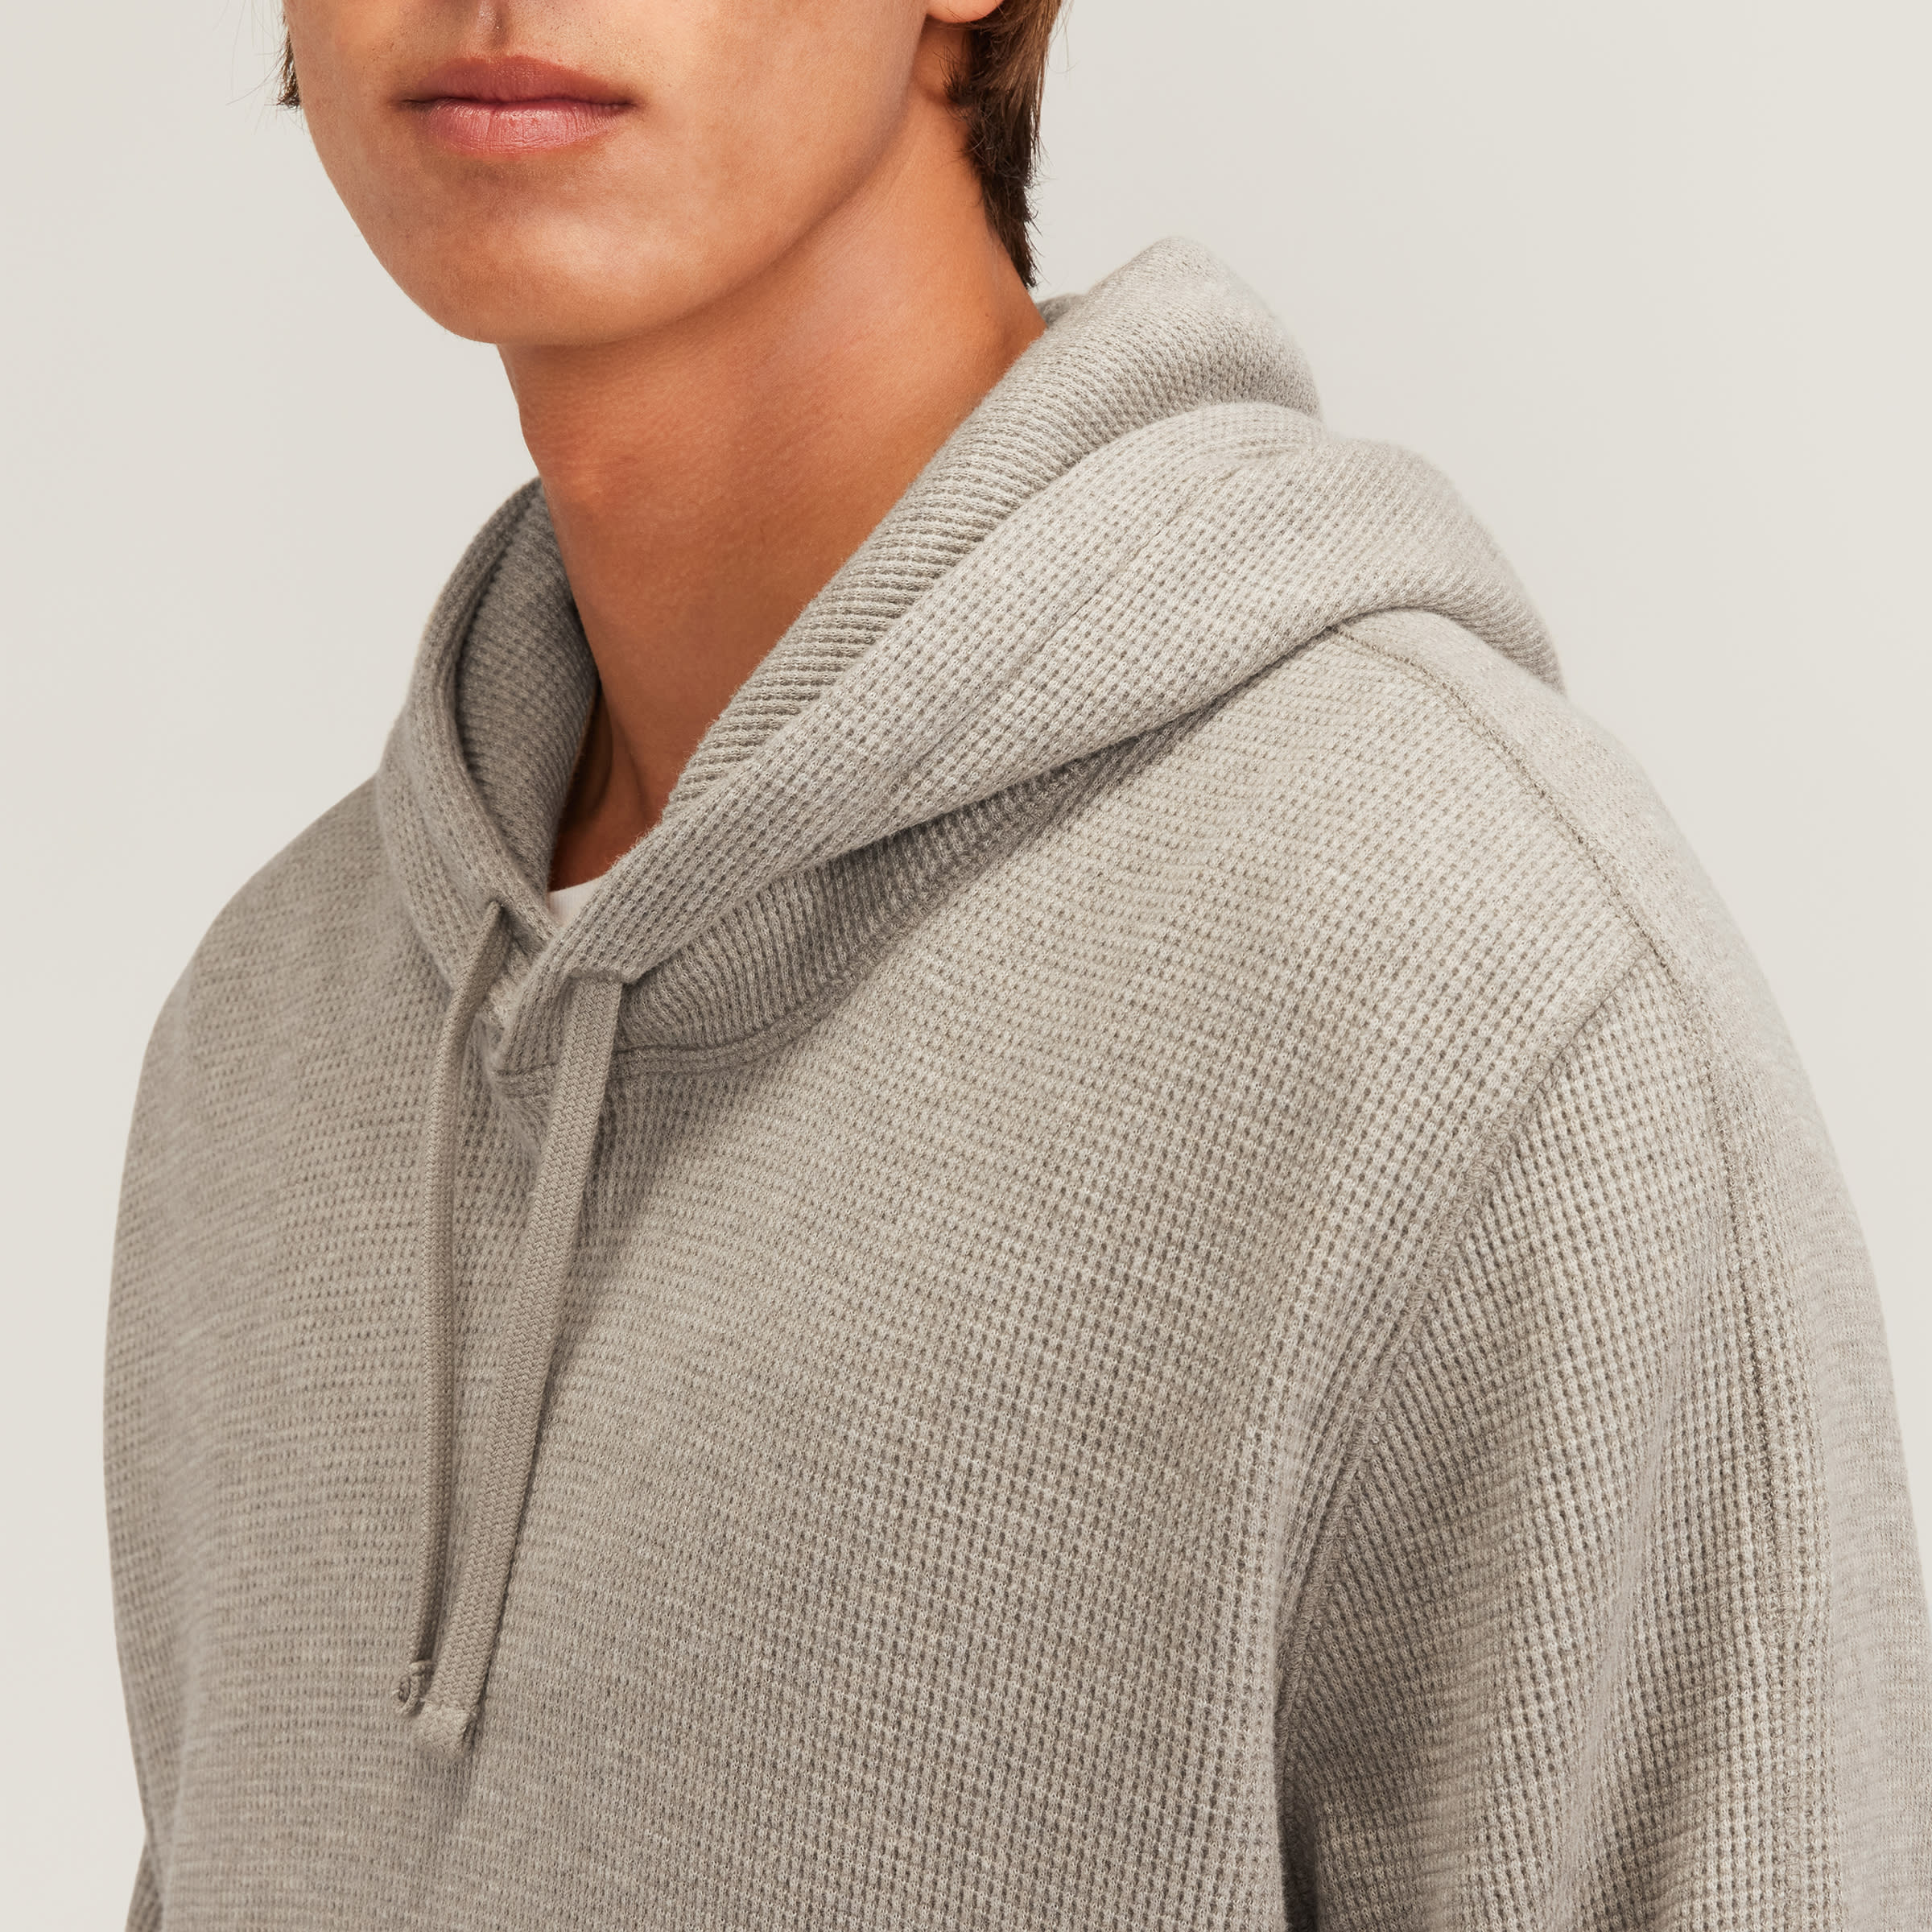 Men's Baby Alpaca Waffle Stitch Hooded Pullover